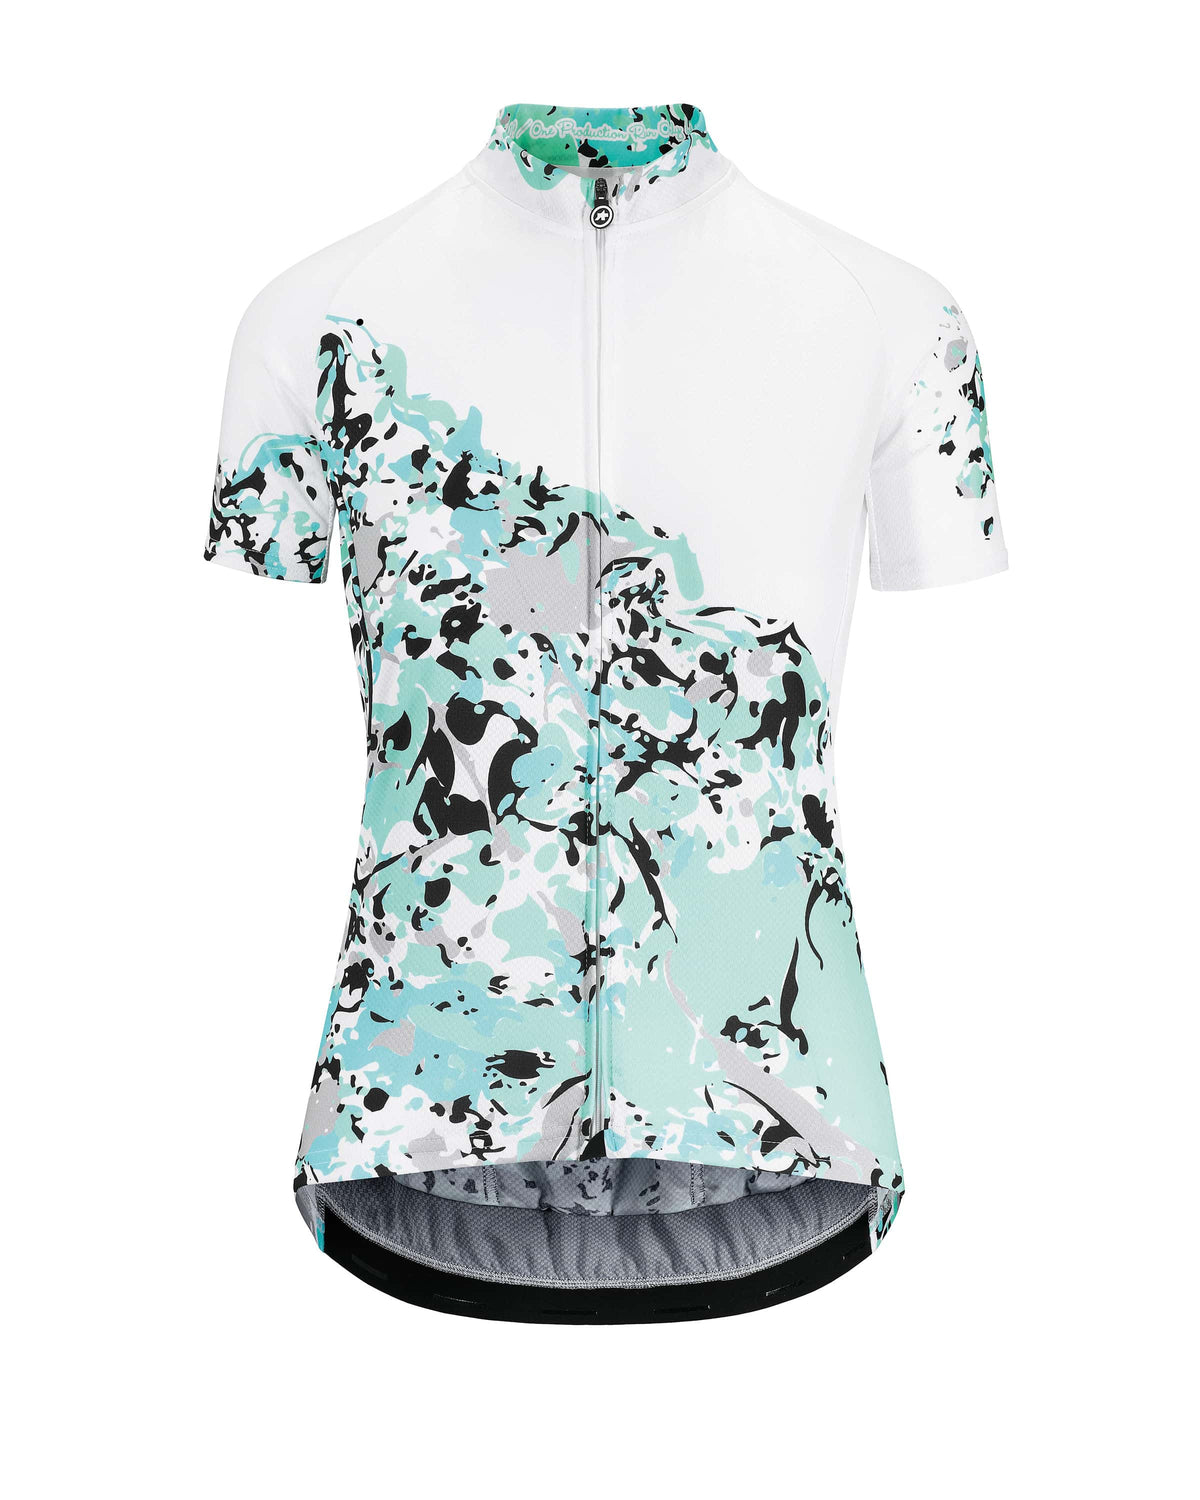 Assos Lady’s SS Jersey - Marble